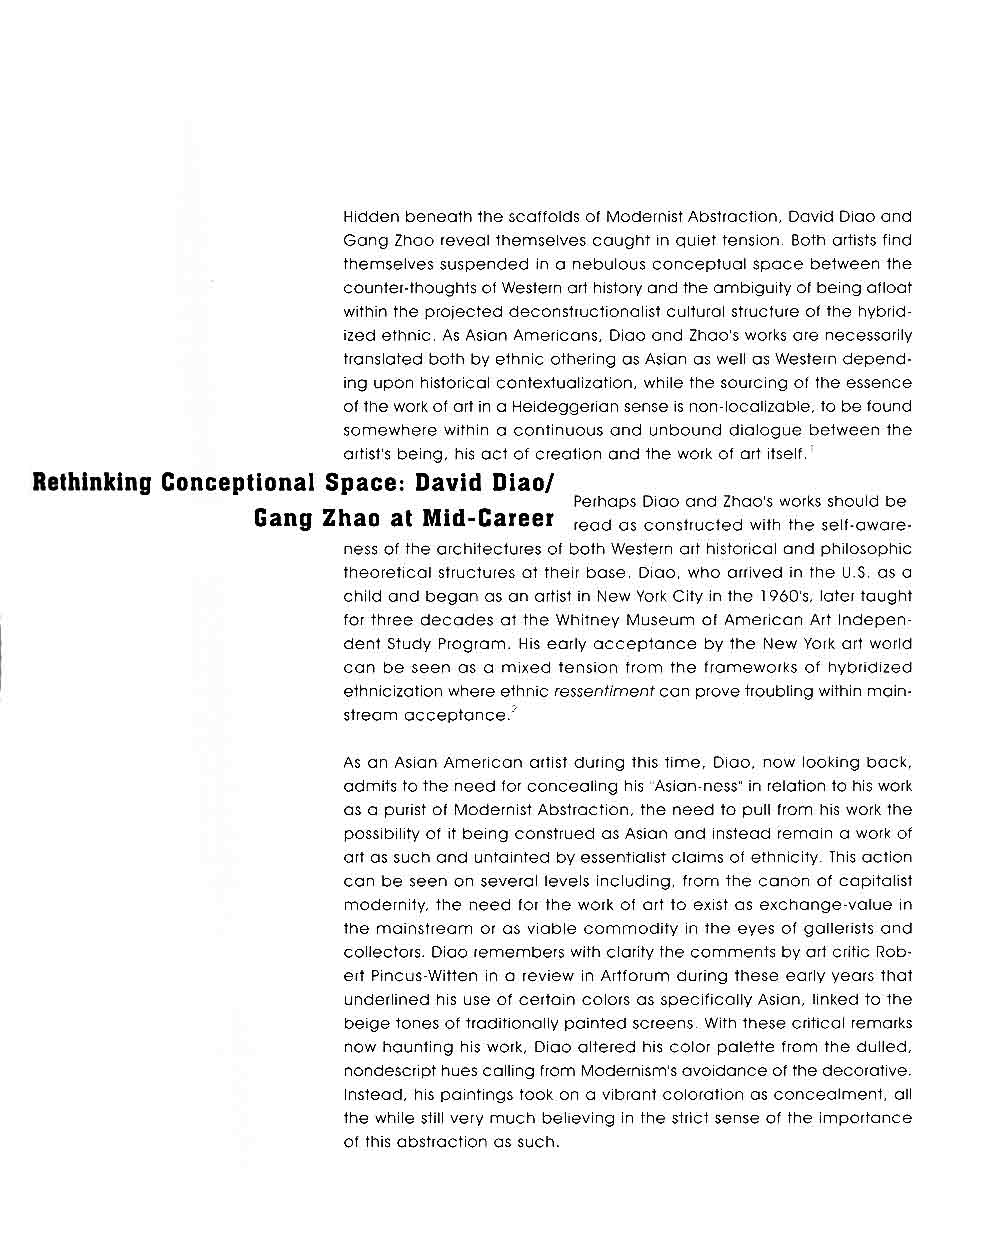 Rethinking a Conceptual Space, pg 2